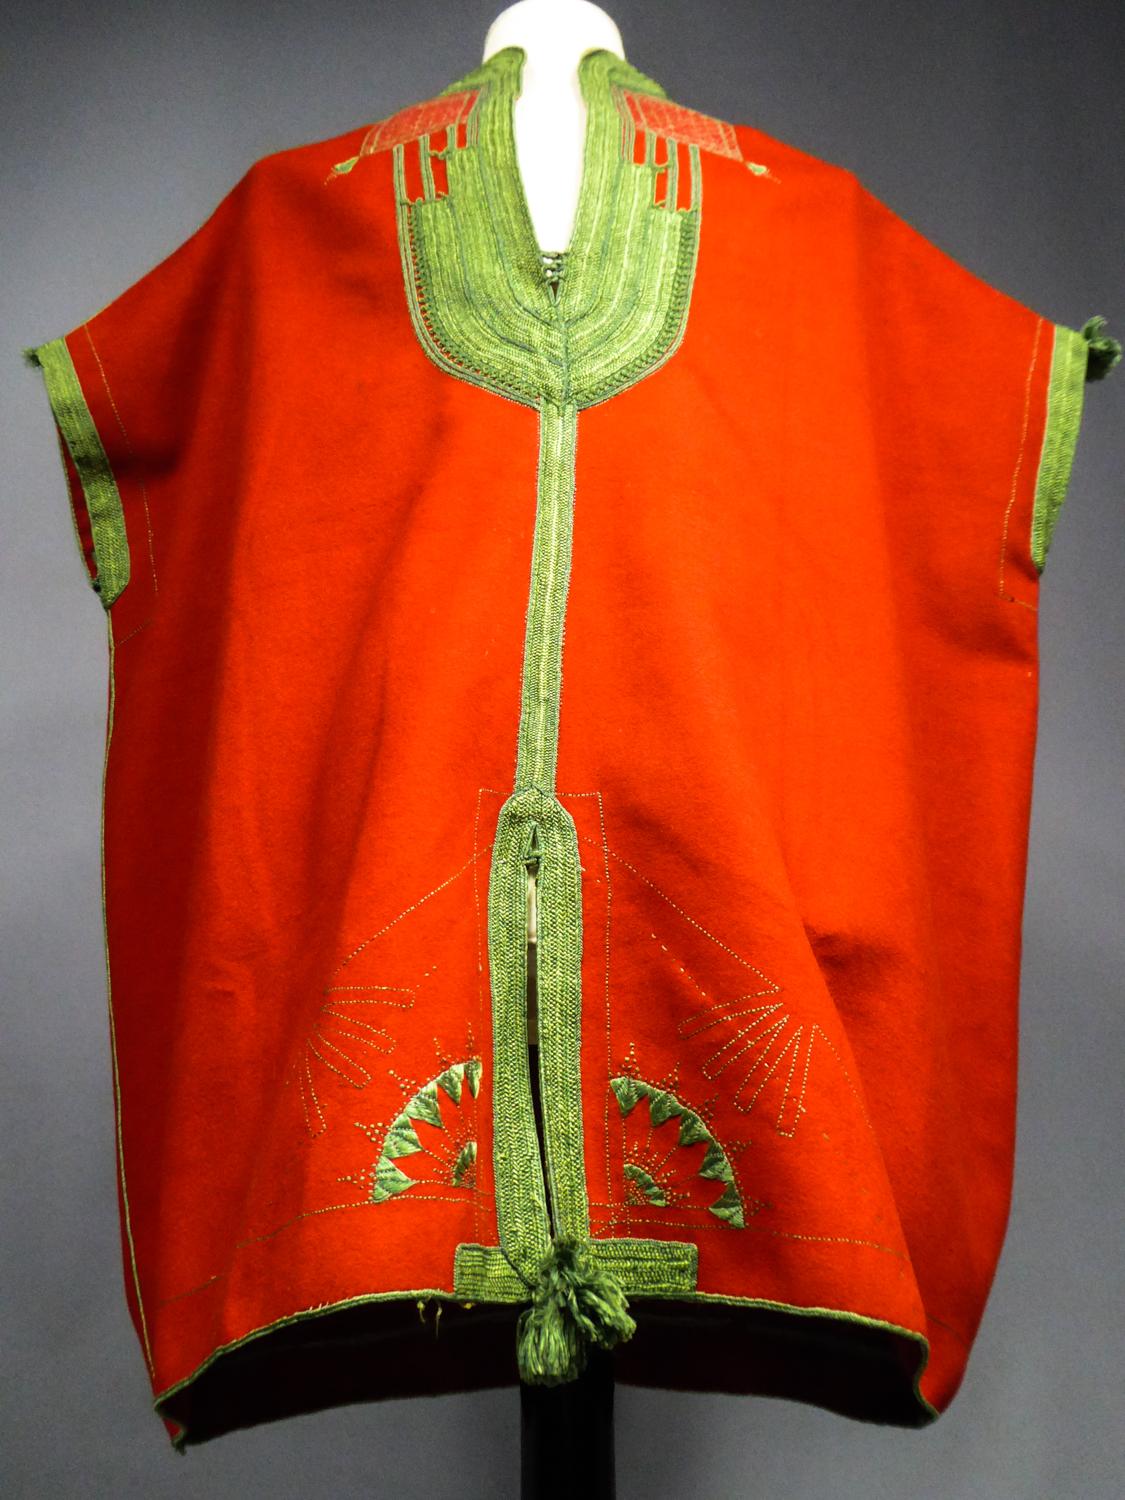 A Ceremonial Jebba Tunic in Felt Embroidered with Silk - Tunisia Circa 1900/1950 For Sale 5